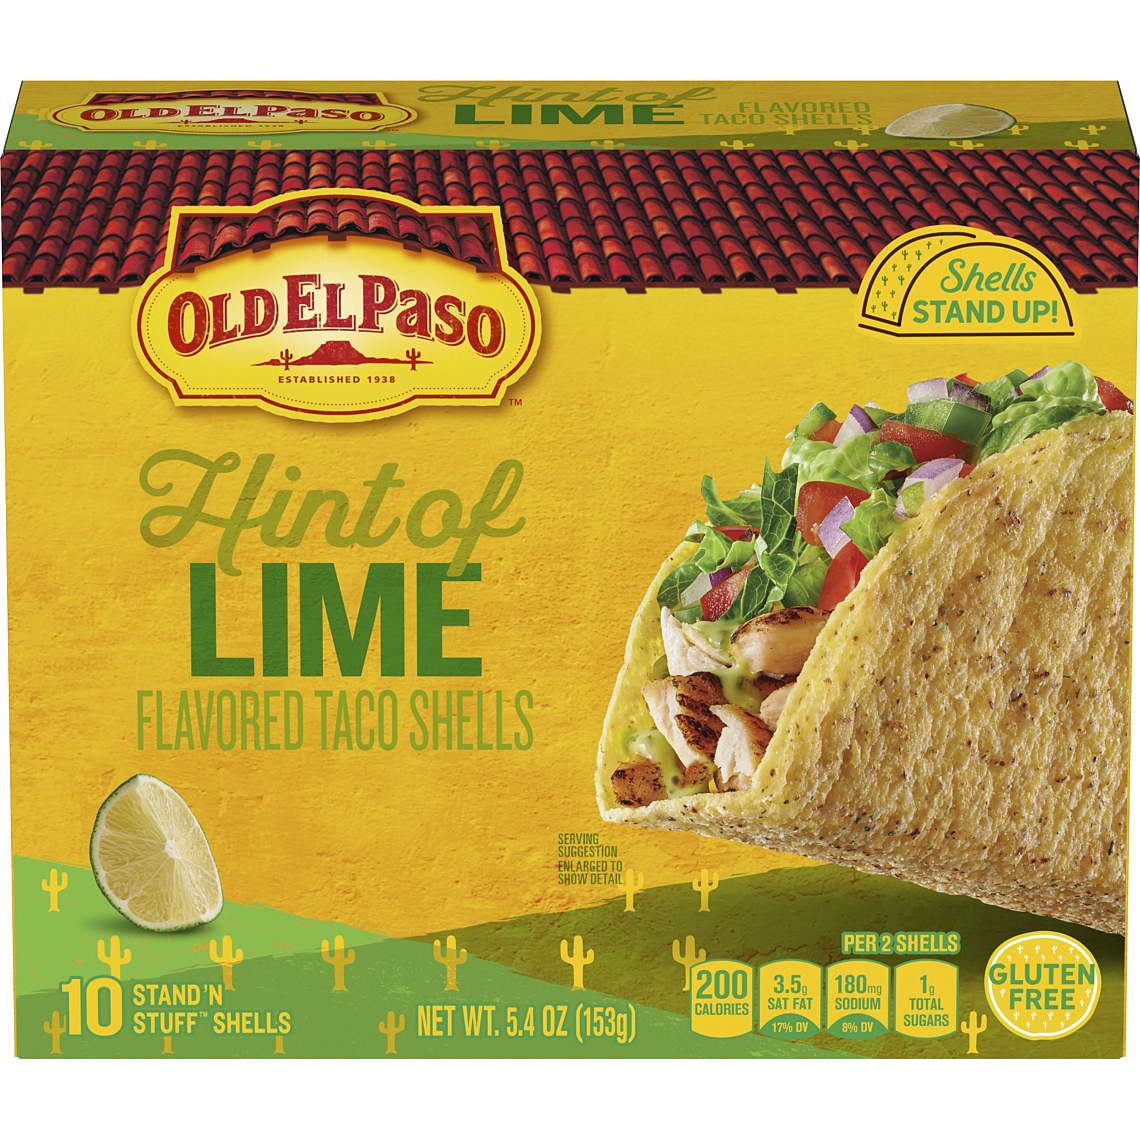 Stand \'N Stuff Taco Shells - Hint of Lime - Old El Paso